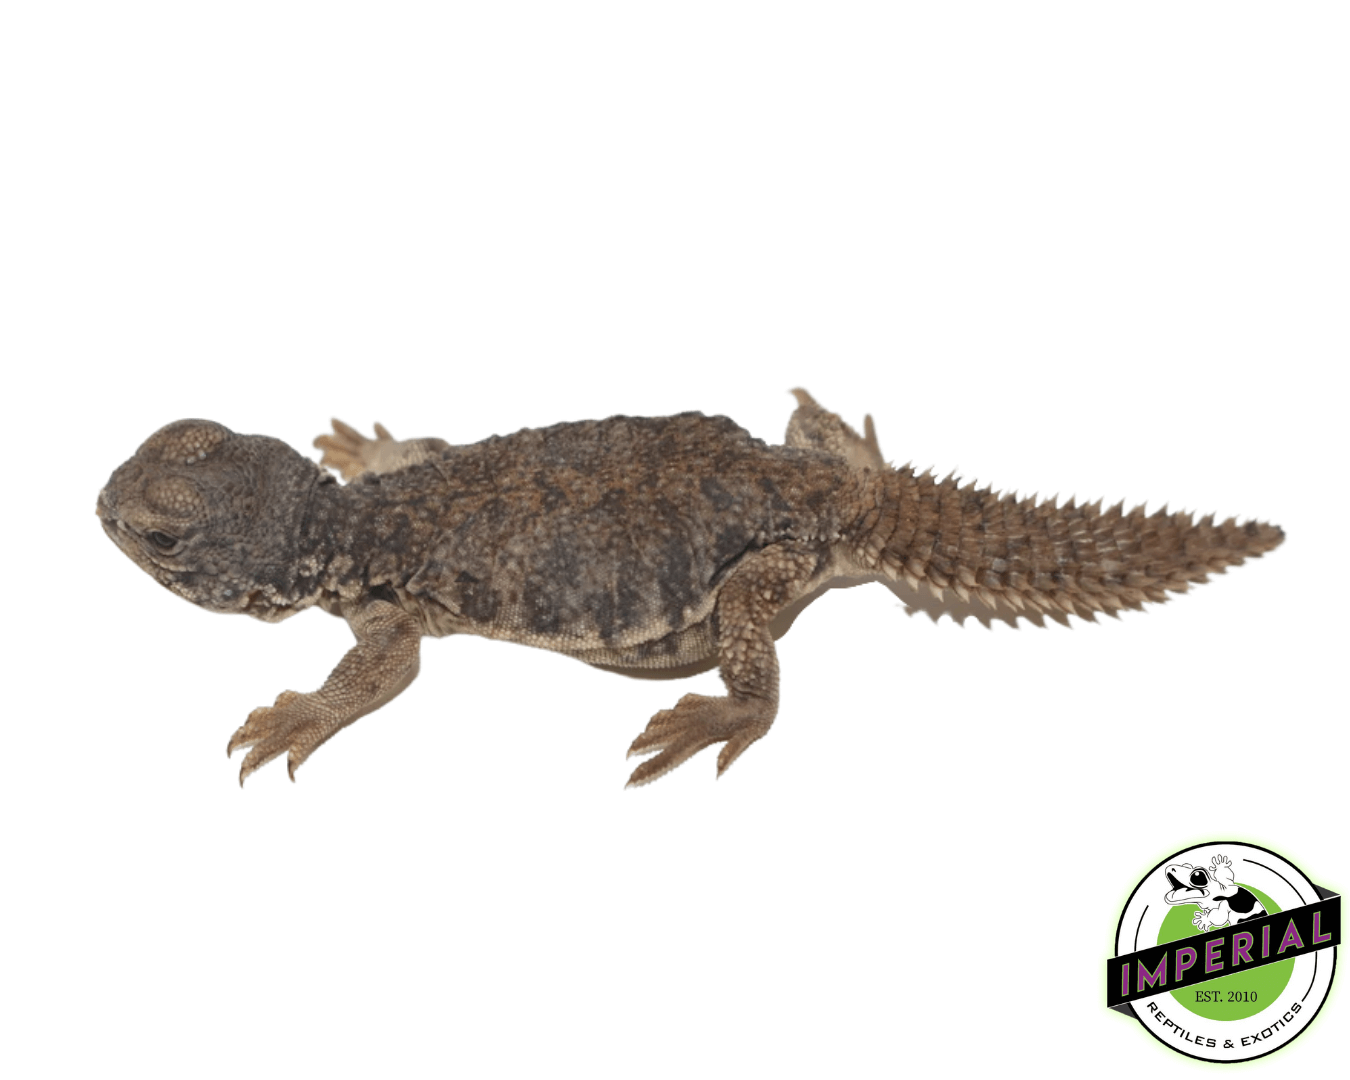 Moroccan Uromastyx for sale, buy reptiles online